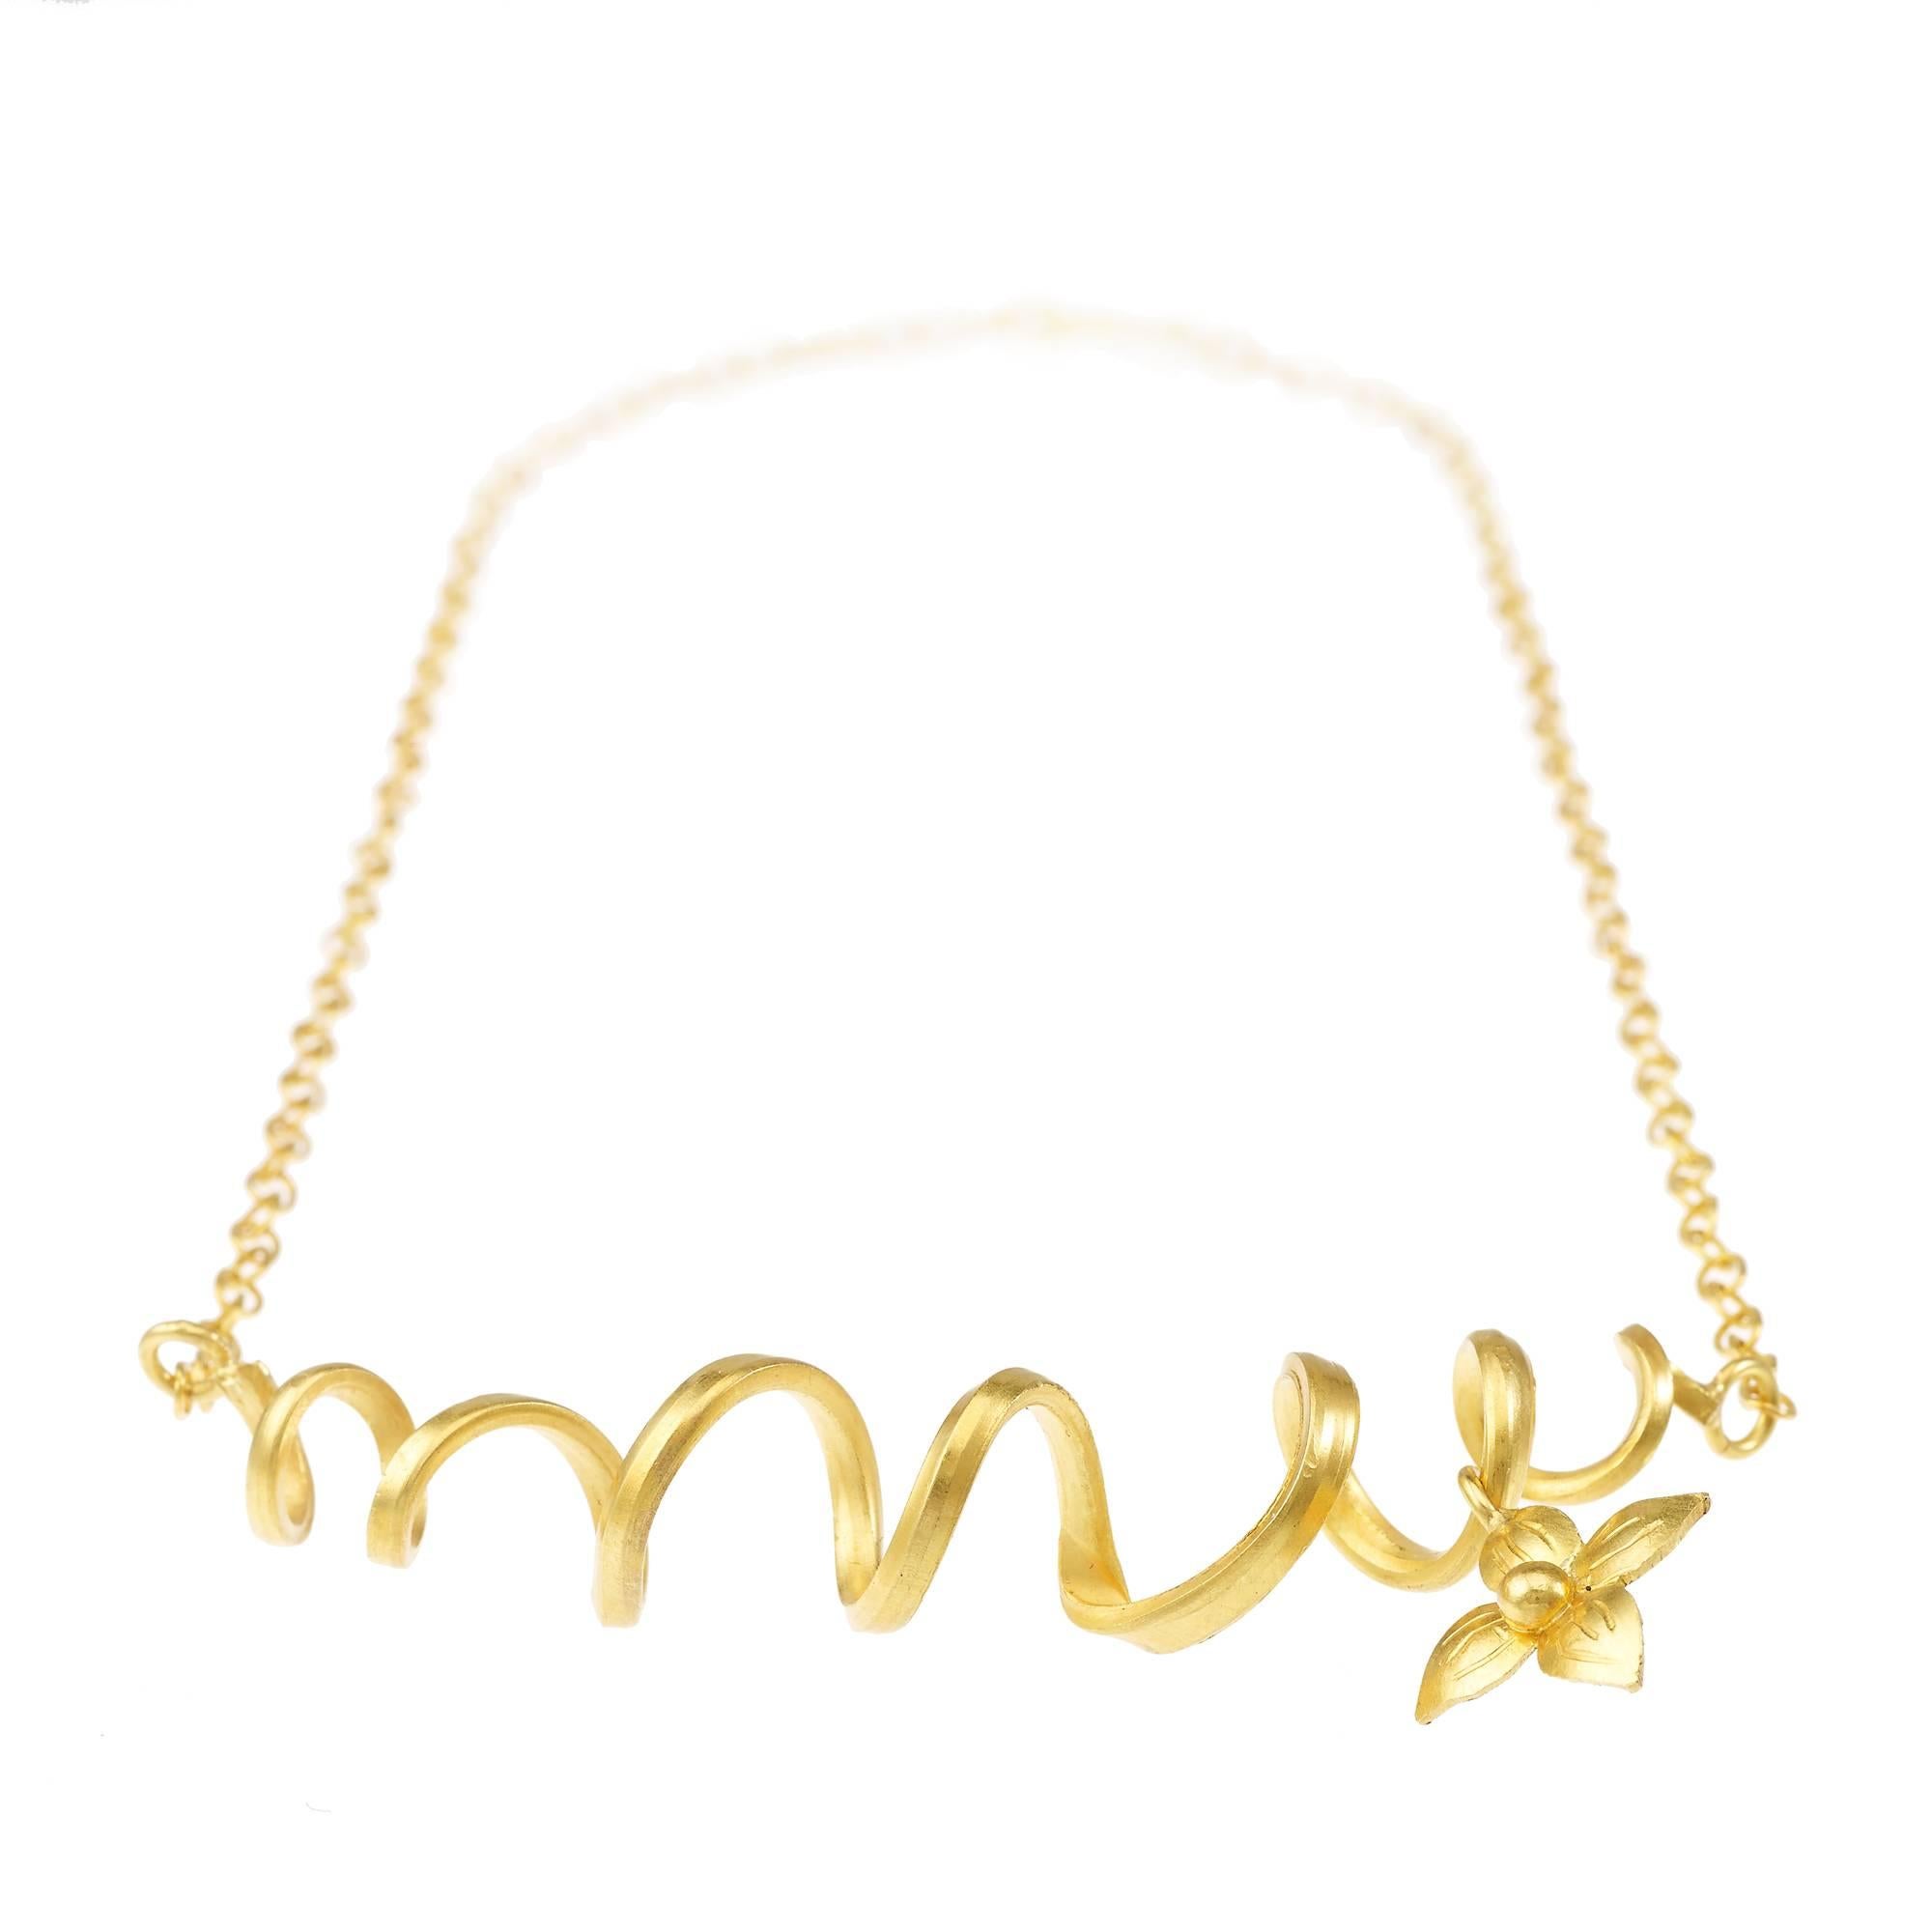 Inspired by the jungles of the Yungus, on the slopes of the Andes where the Cotopata mine is situated, the Bolivian Ethical Gold Collection features twisting tendrils, exotic flowers and leaves, birds and bells that echo the joyful sound of tropical